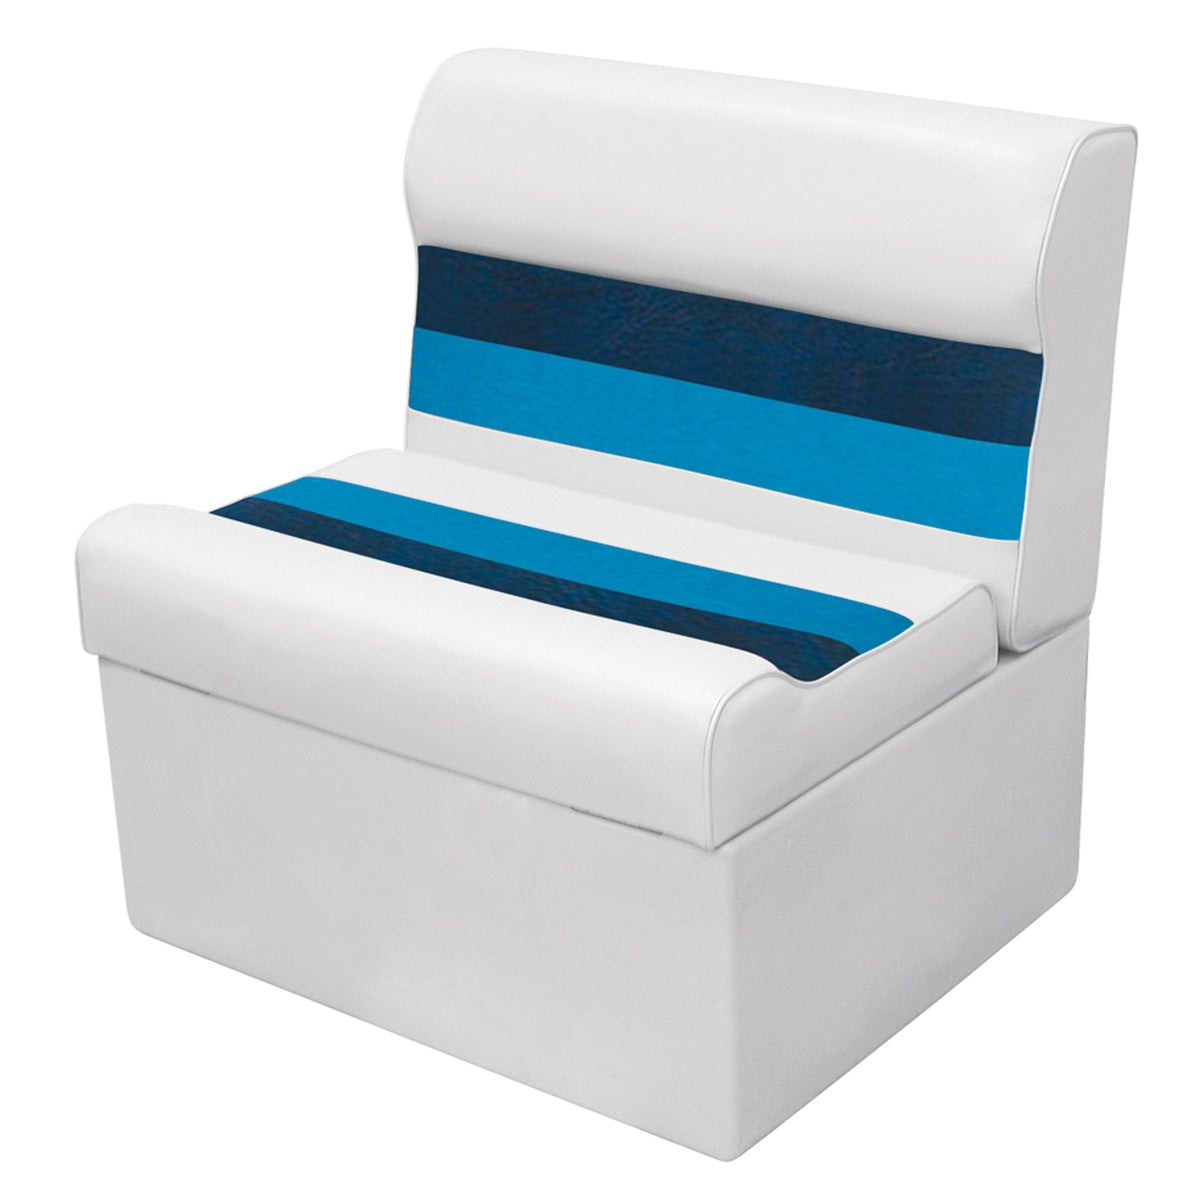 Wise Oversized - Not Qualified for Free Shipping Wise 27" Lounge Seat White/Navy/Blue #8WD95-1008